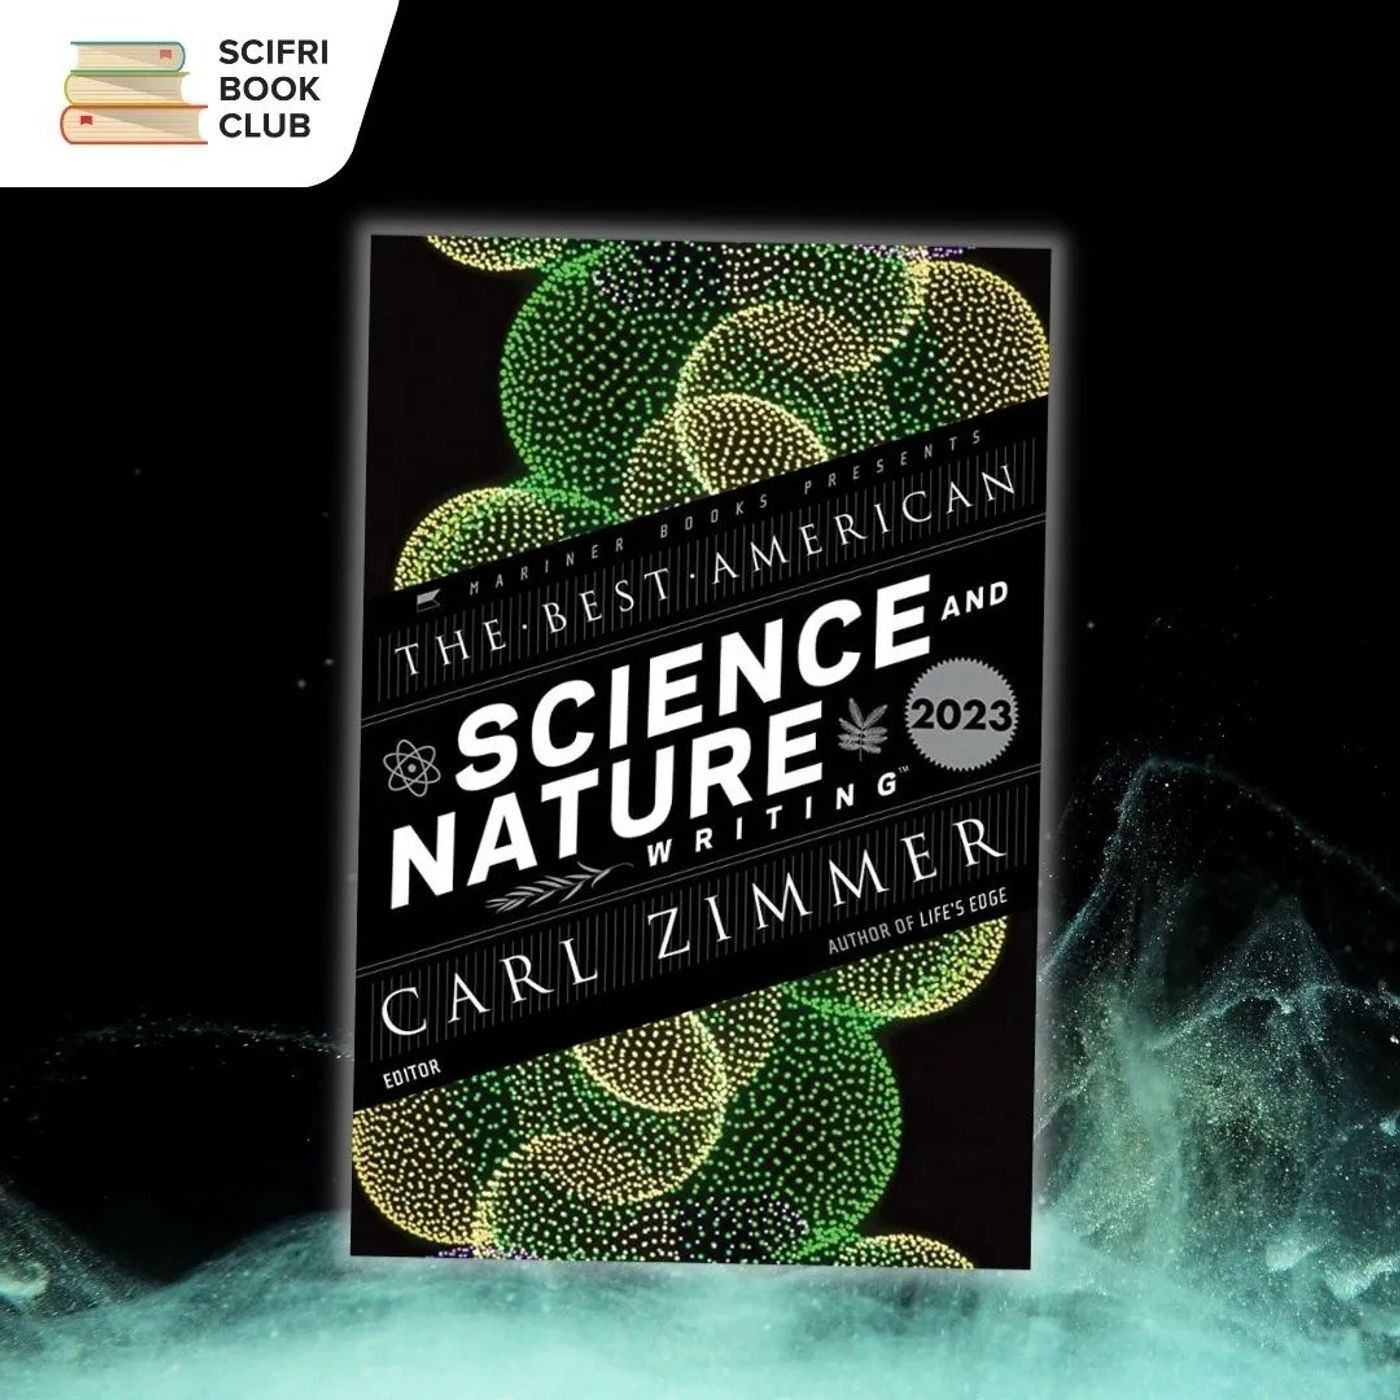 673: SciFri Reads ‘The Best American Science and Nature Writing 2023’